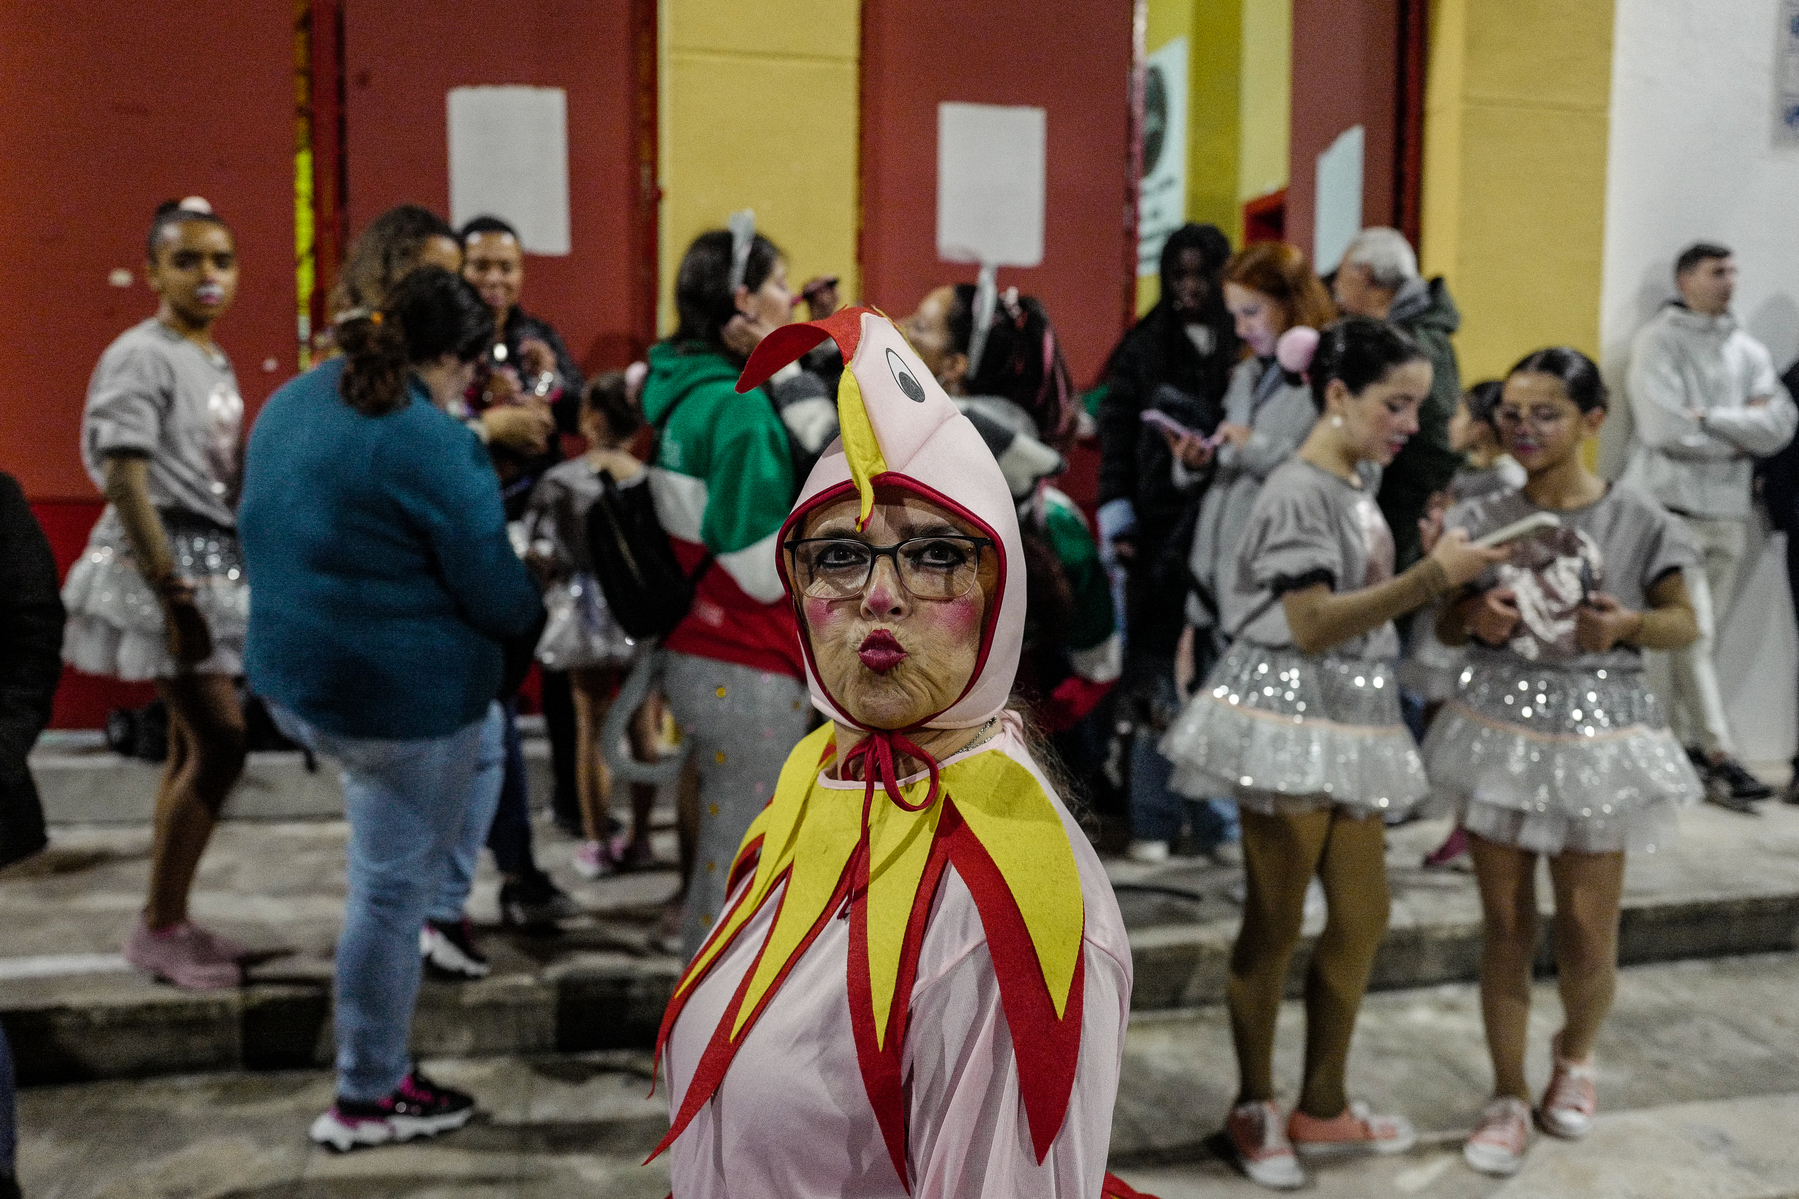 A person dressed in a colorful chicken costume with face paint stands in the foreground among a crowd of people, some of whom are wearing matching outfits and using their phones. The background is blurry, emphasizing the individual in the chicken costume.